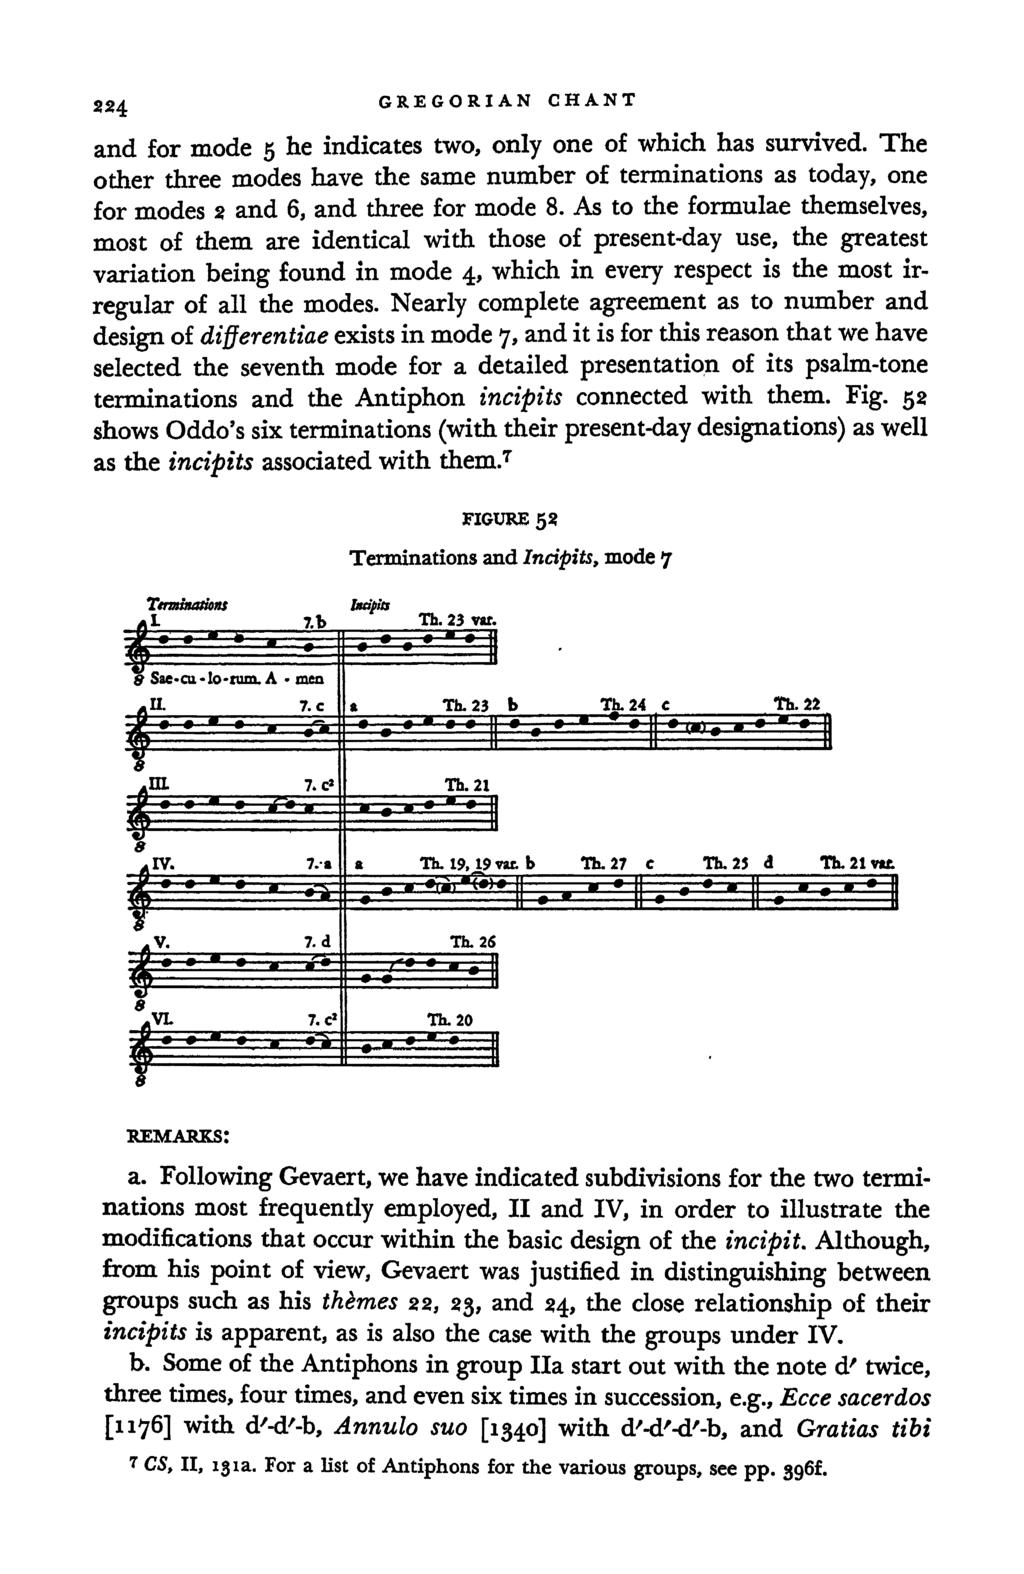 224 GREGORIAN CHANT and for mode 5 he indicates two, only one of which has survived. The other three modes have the same number of terminations as today, one for modes 2 and 6, and three for mode 8.